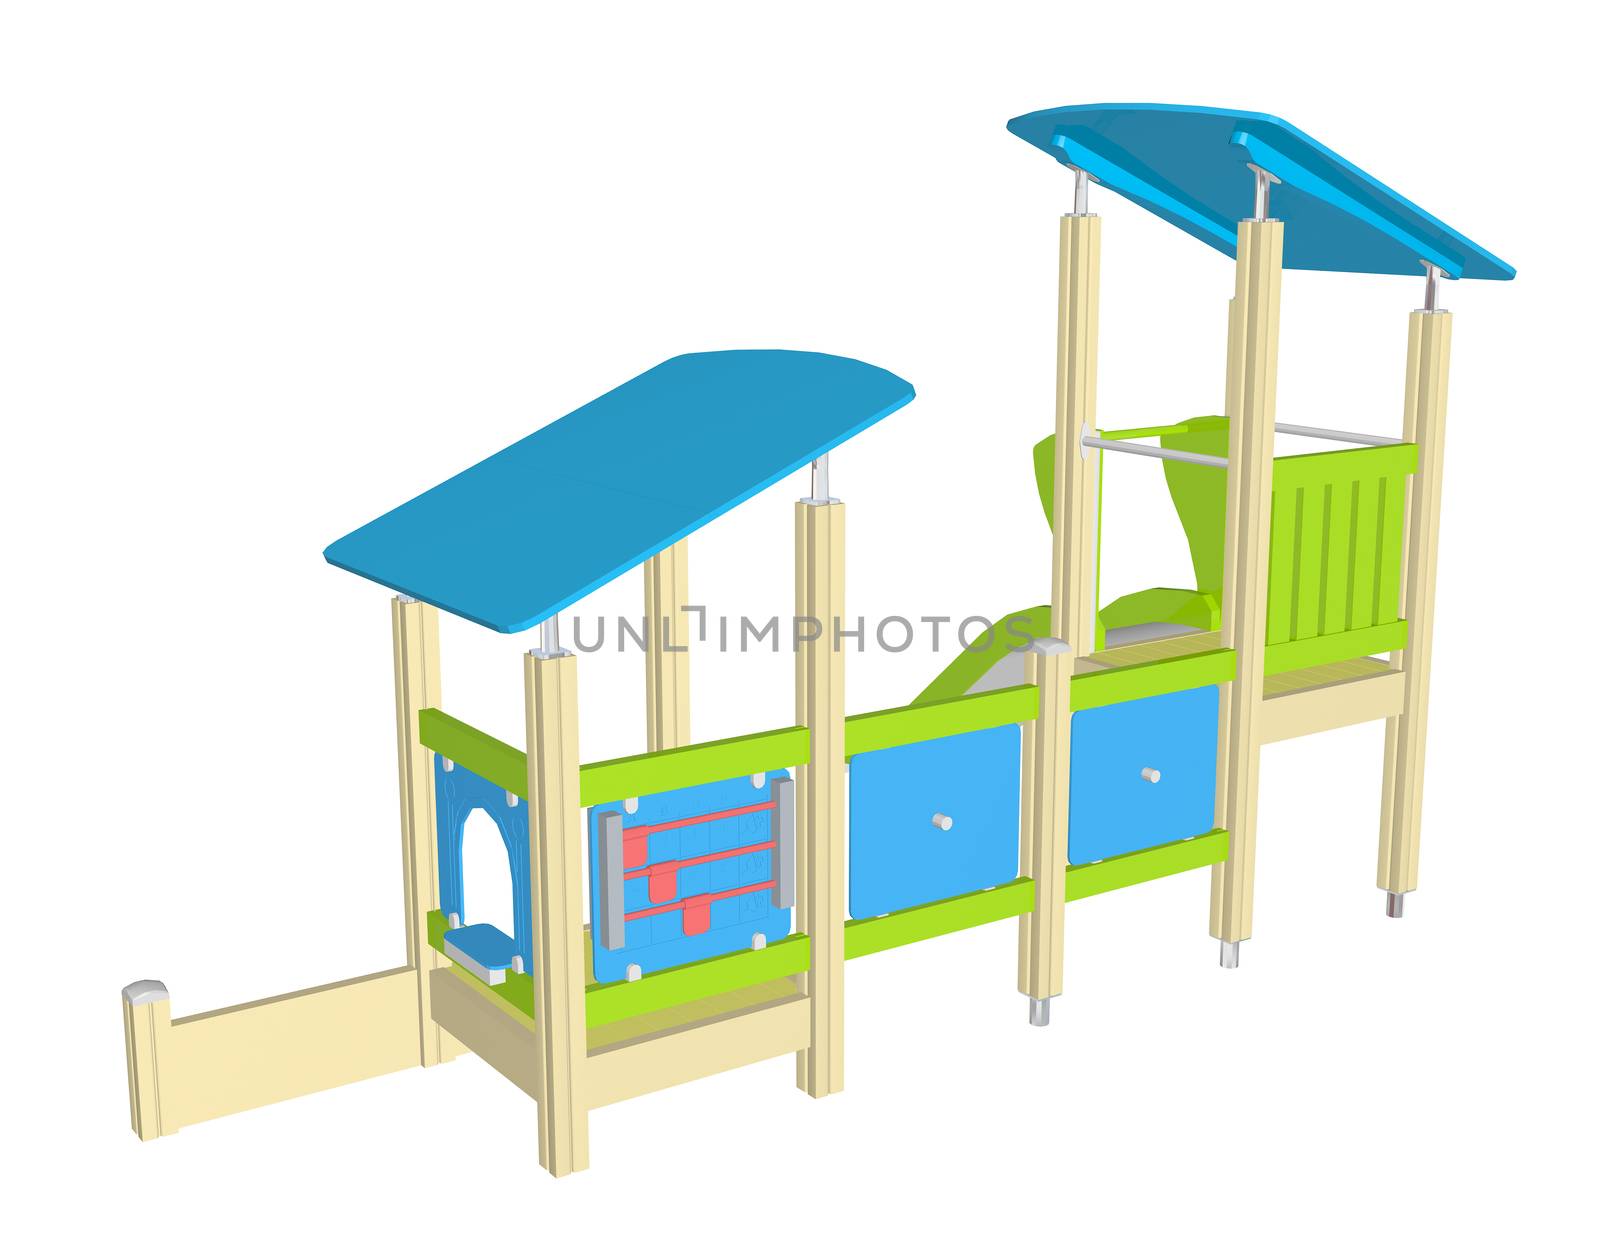 Playhouse with slide, 3D illustration by Morphart